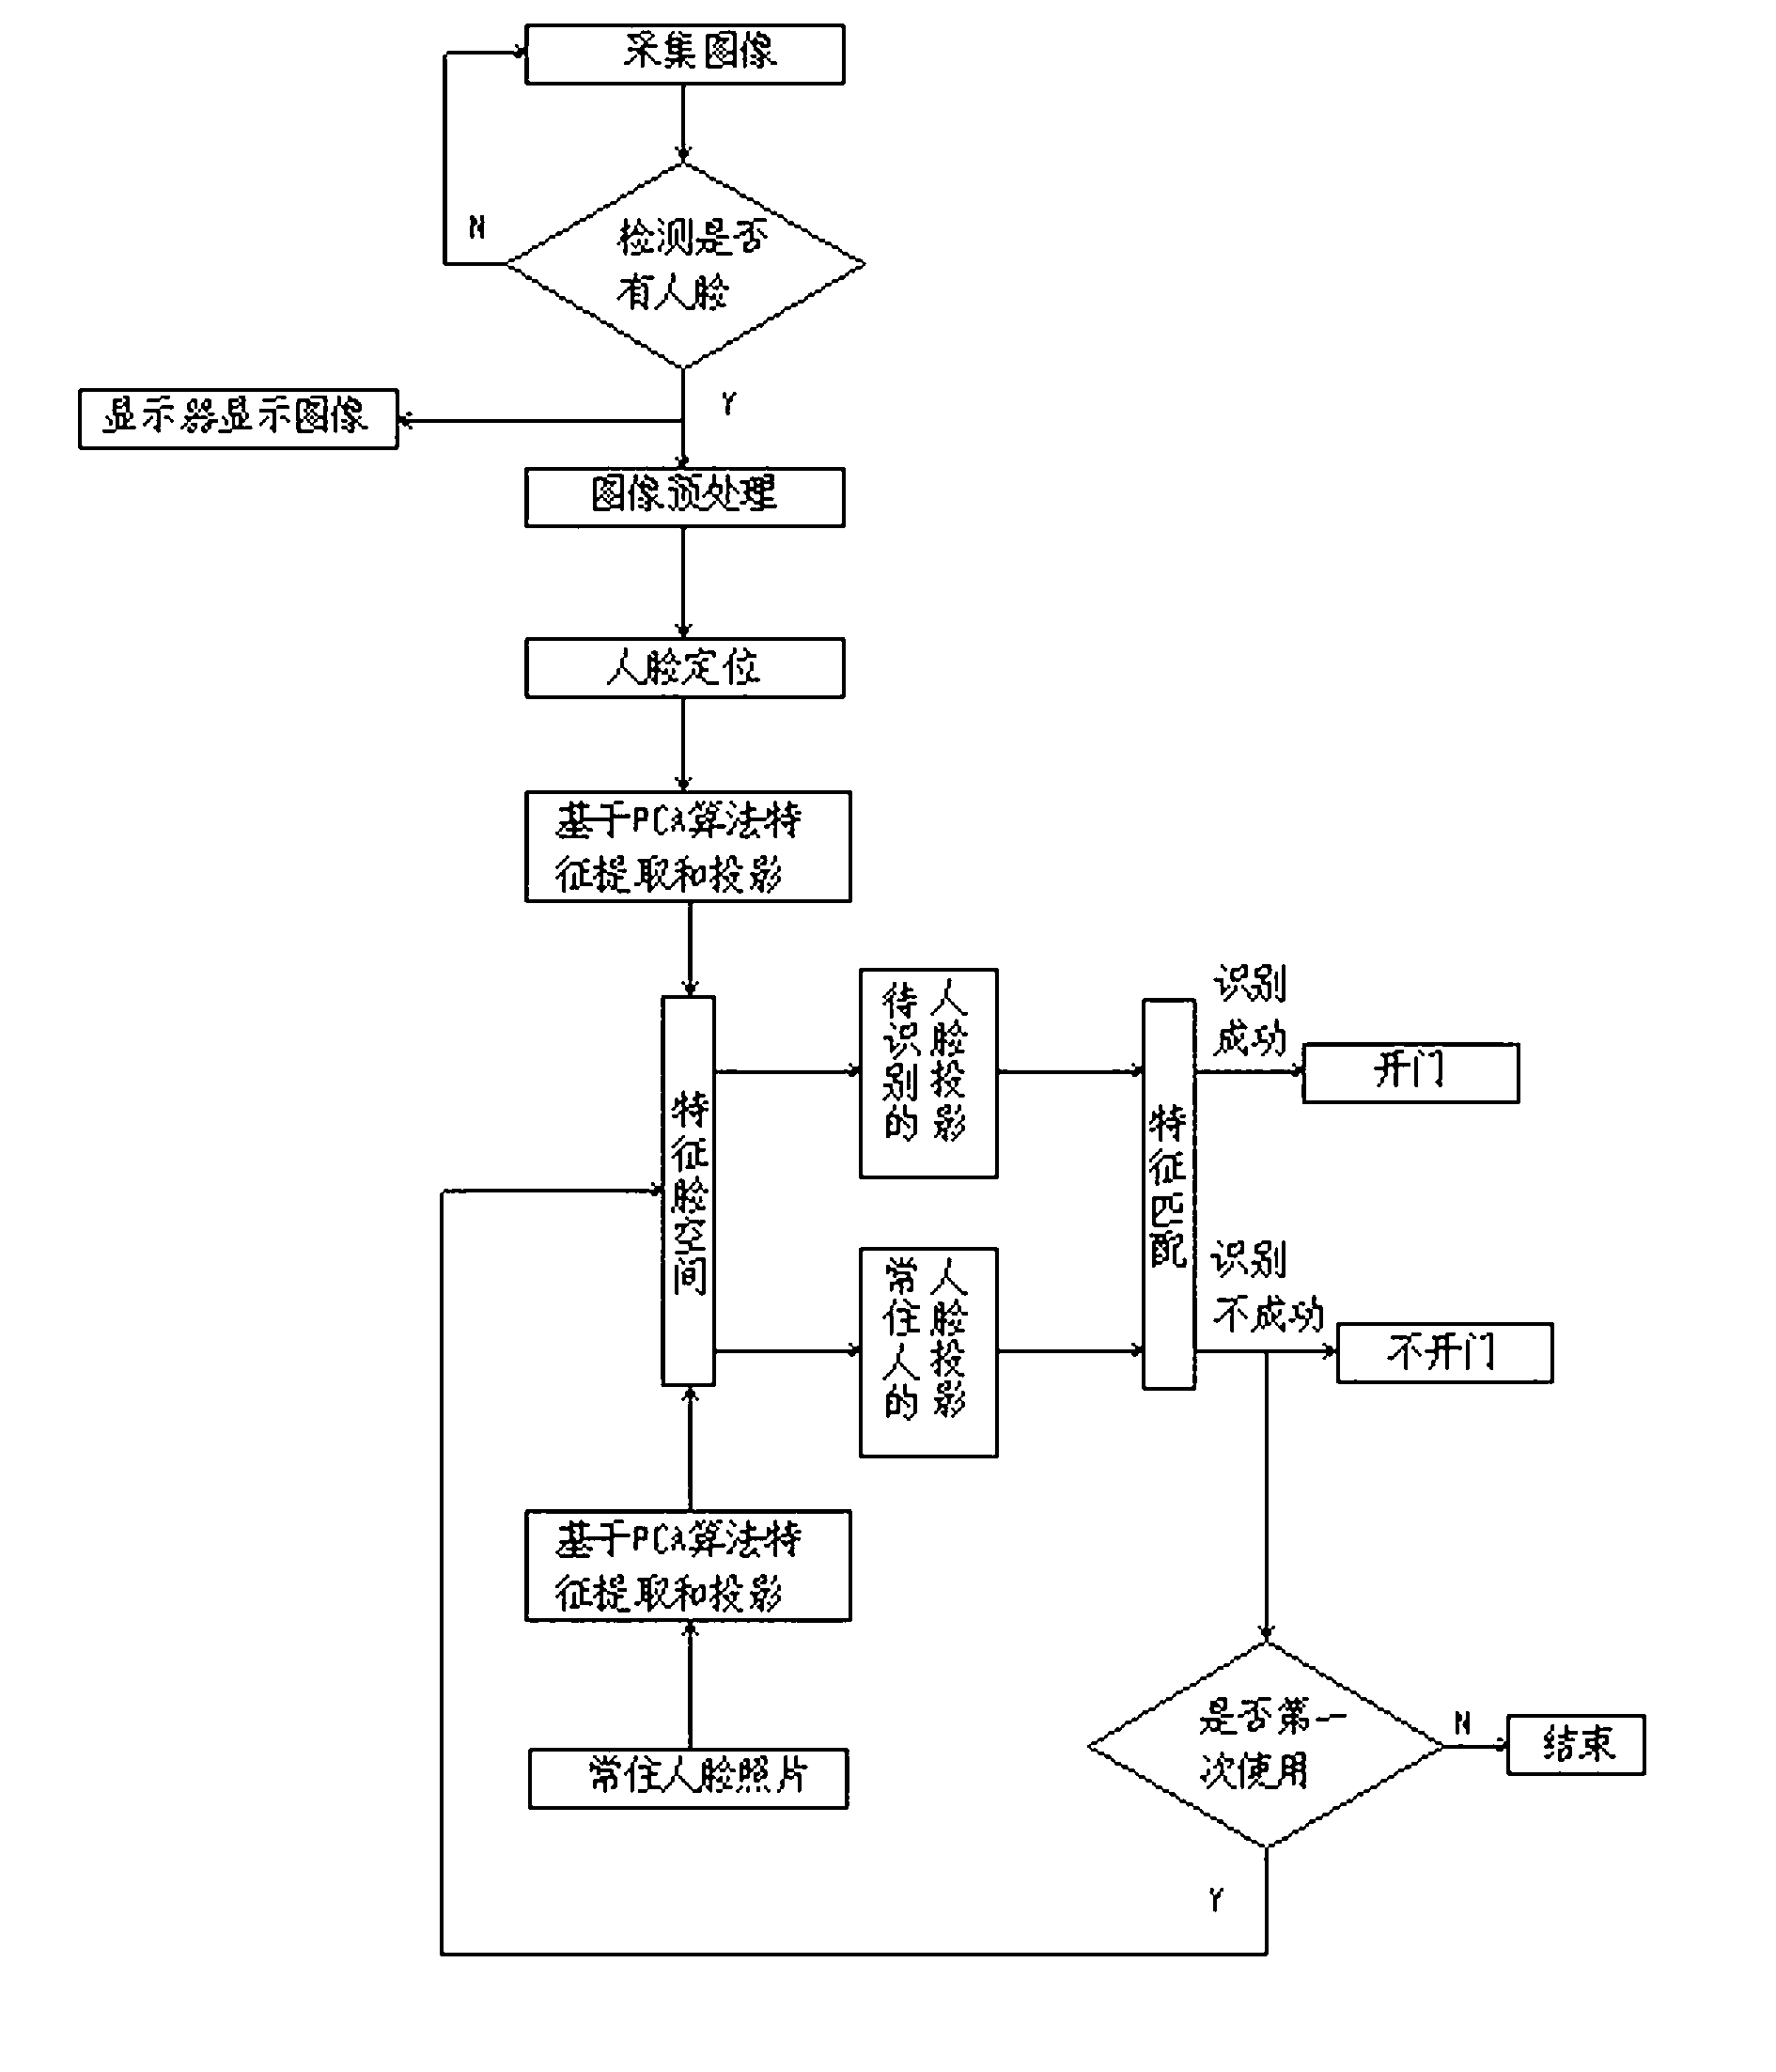 Face identification method for access control system